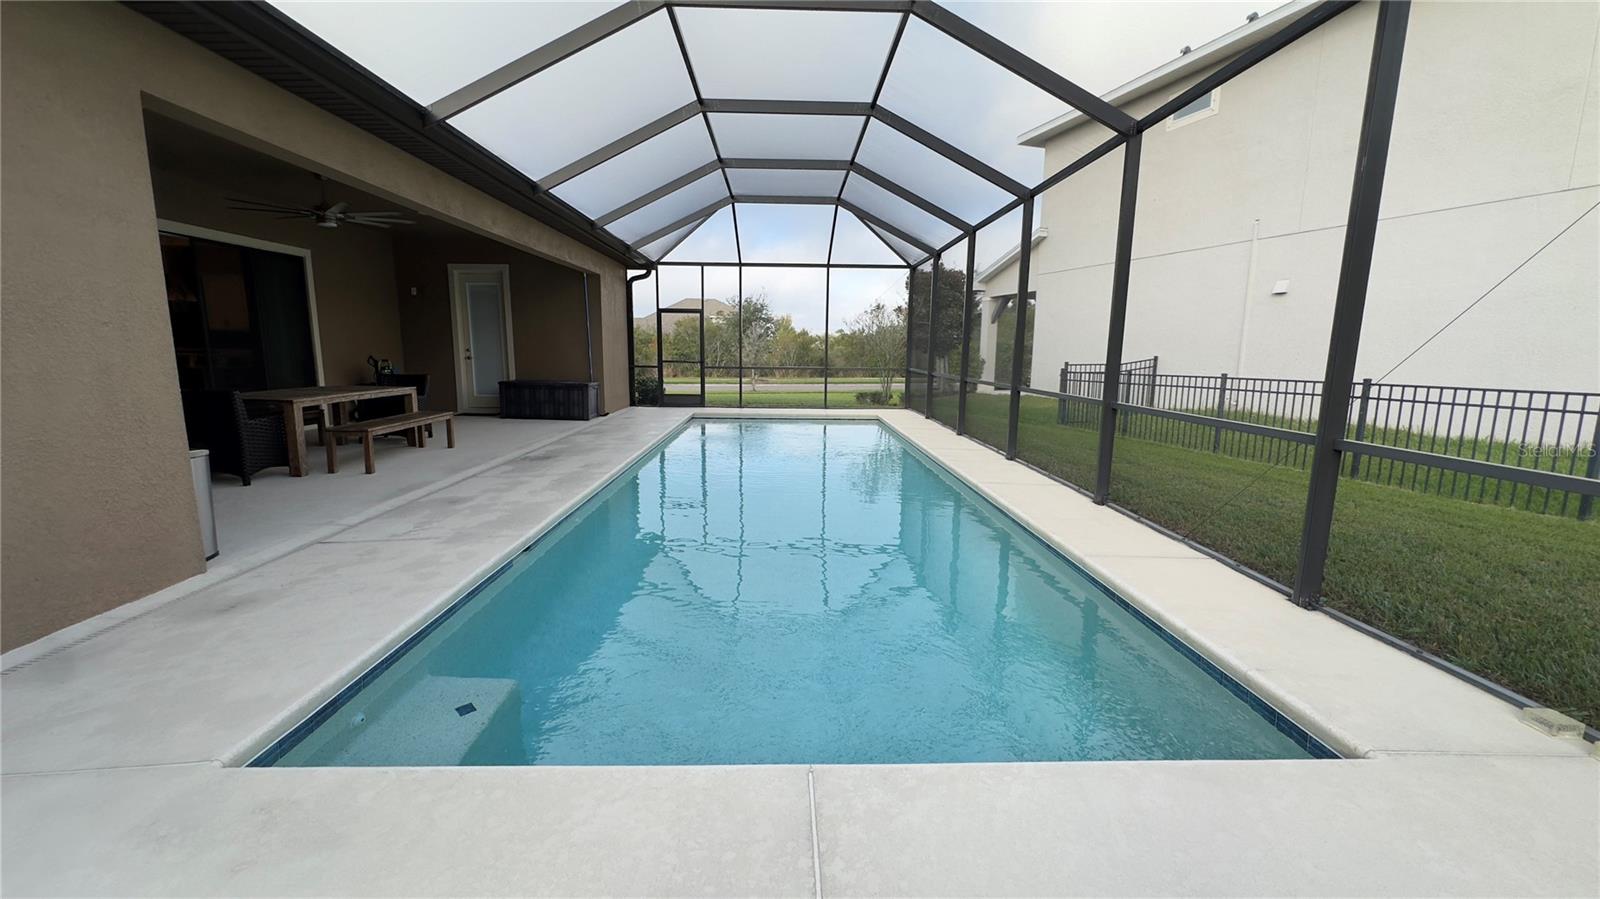 But this 35-ft long lap-style pool also offers opportunities for serious workouts in the comfort of yourhome